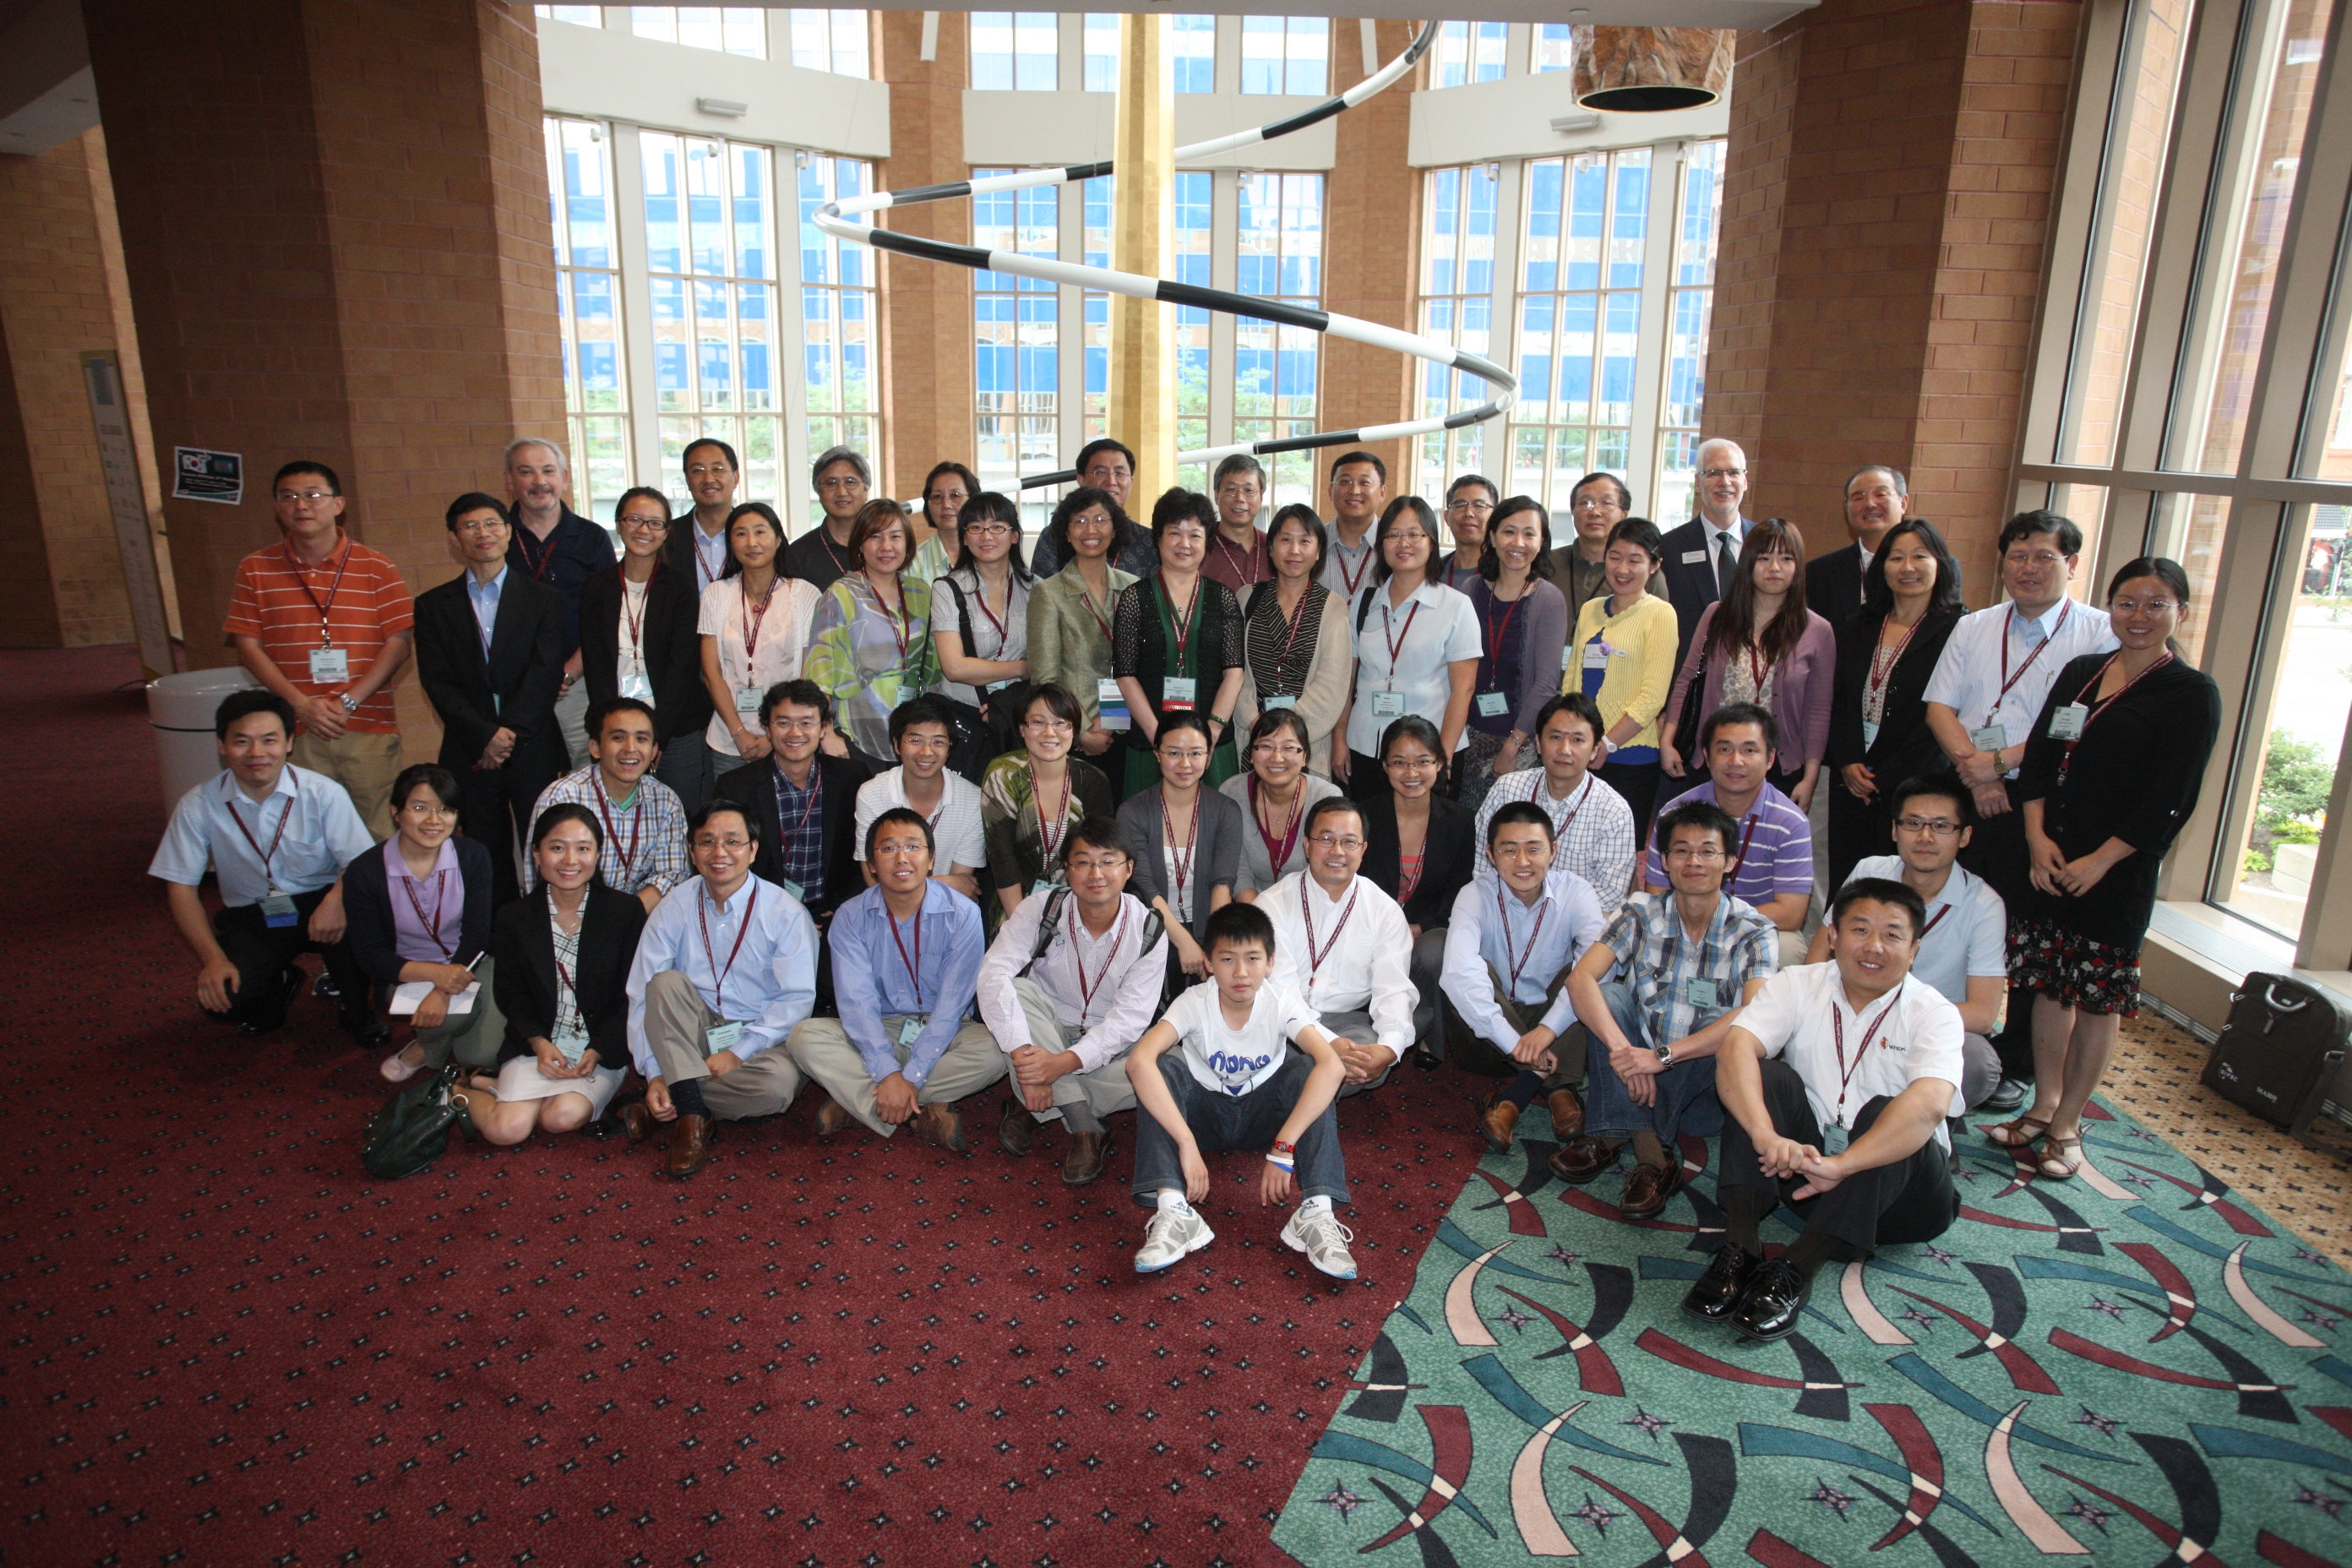 The group who joined IAFP 2011